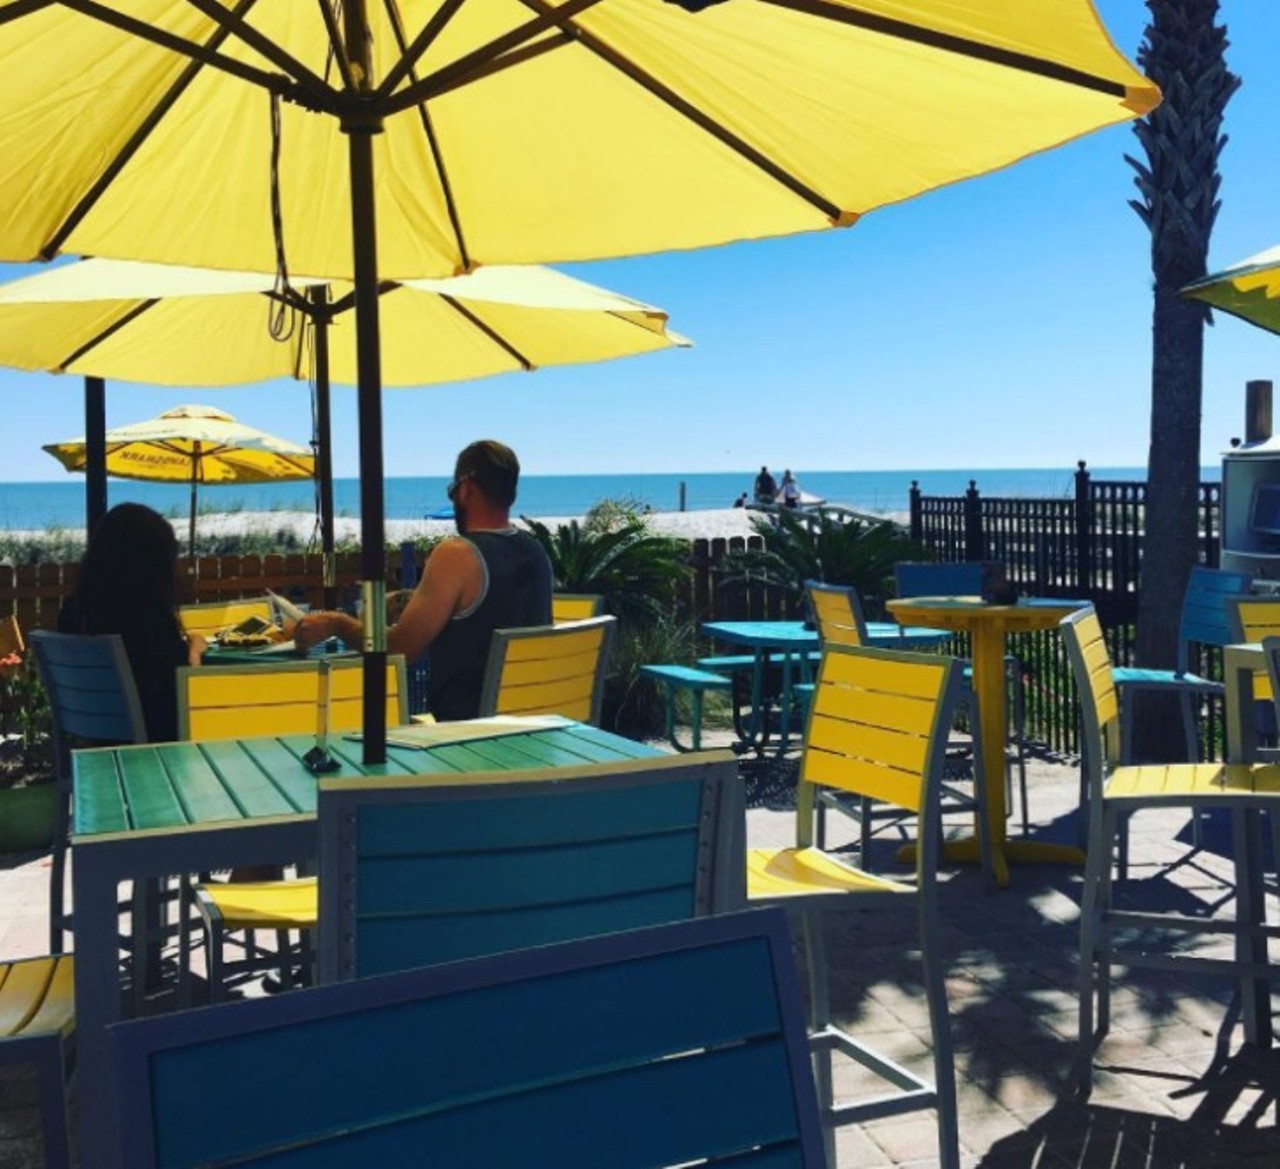 The Lemon Bar
120 Atlantic Blvd, Neptune Beach, 32266
Voted Void Magazine&#146;s number one beach bar, this pina colada dispensing beach bar offers freshly squeezed deliciousness to the Neptunians and visitors that walk on up. Snag some ahi tuna while you&#146;re at it. 
Photo via ginger_merson/Instagram